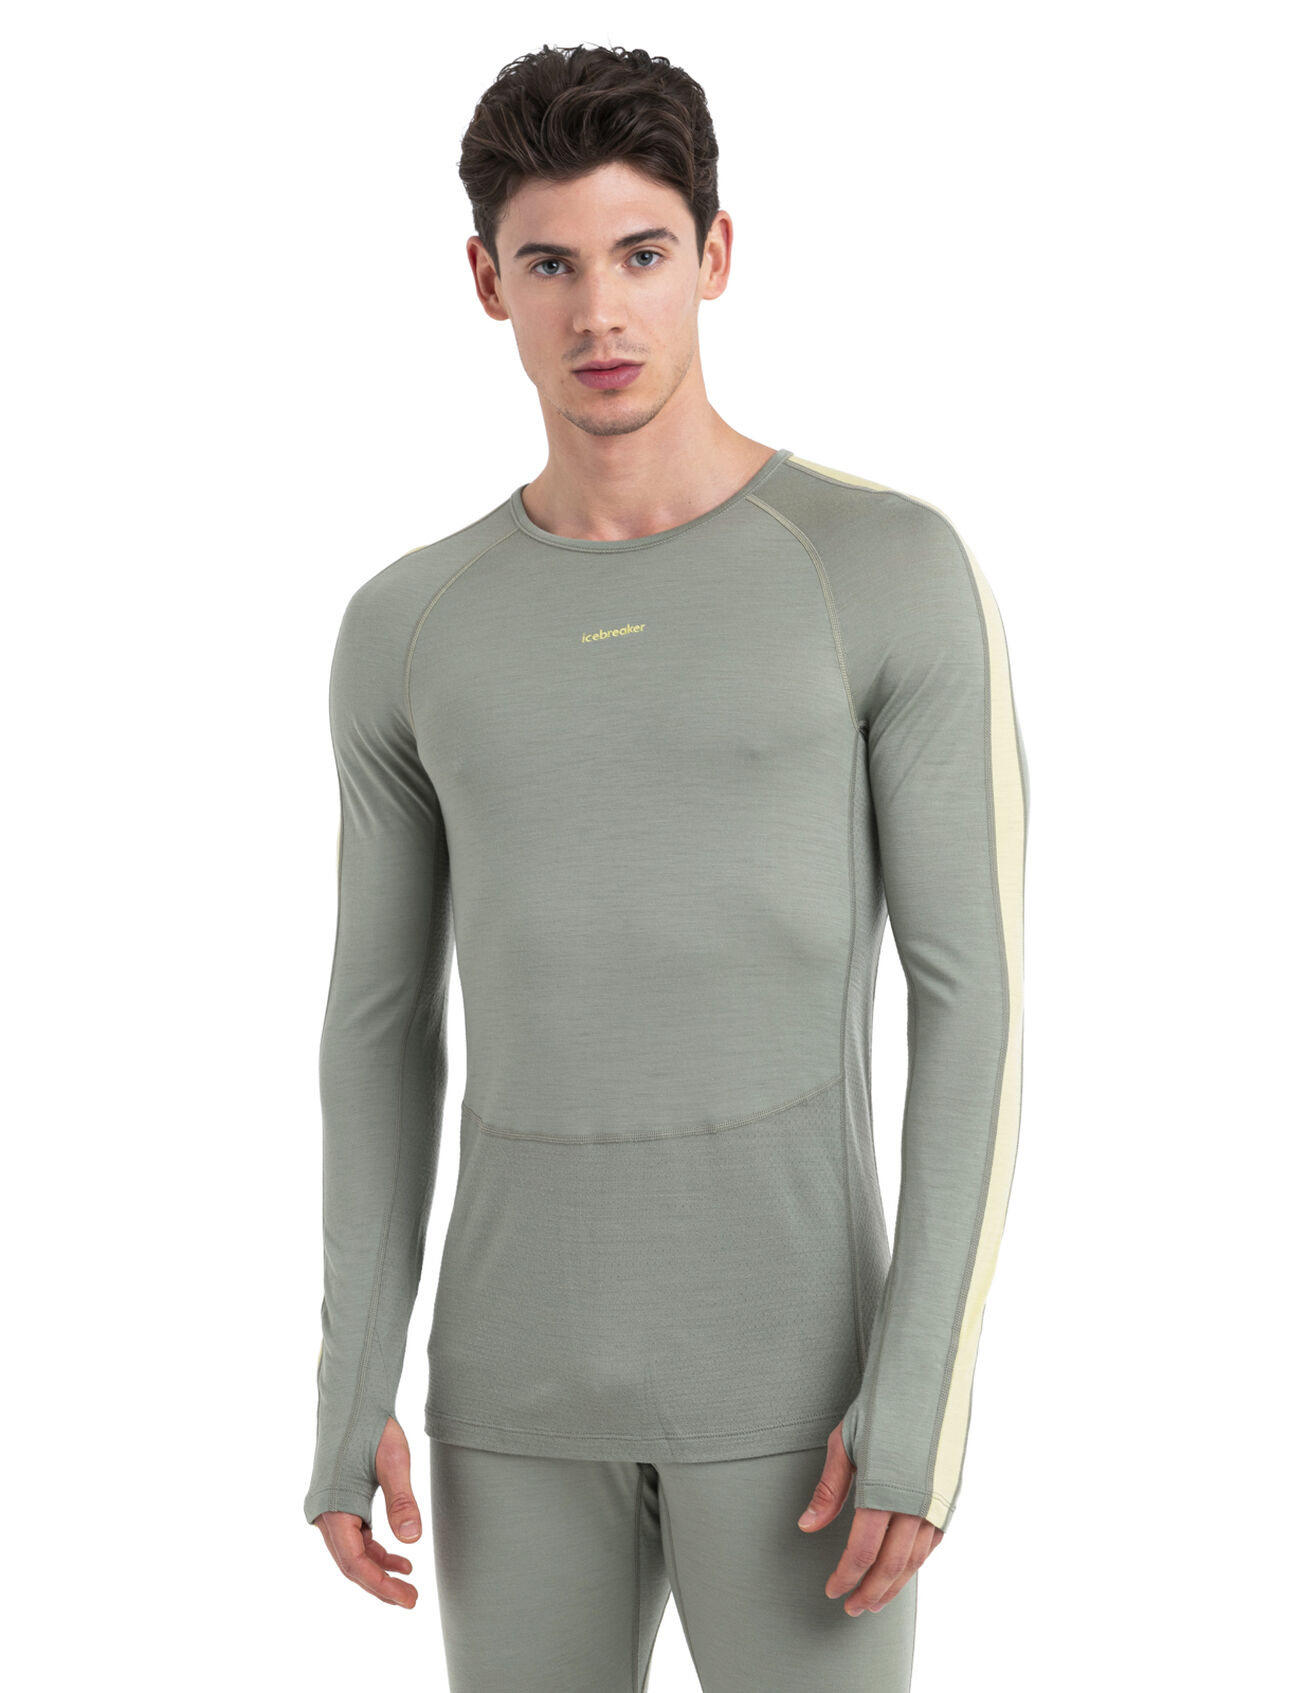 Mens 200 ZoneKnit™ Merino Long Sleeve Crewe Thermal Top A midweight merino base layer top designed to help regulate temperature during high-intensity activity, the 200 ZoneKnit™ Long Sleeve Crewe features 100% pure and natural merino wool.